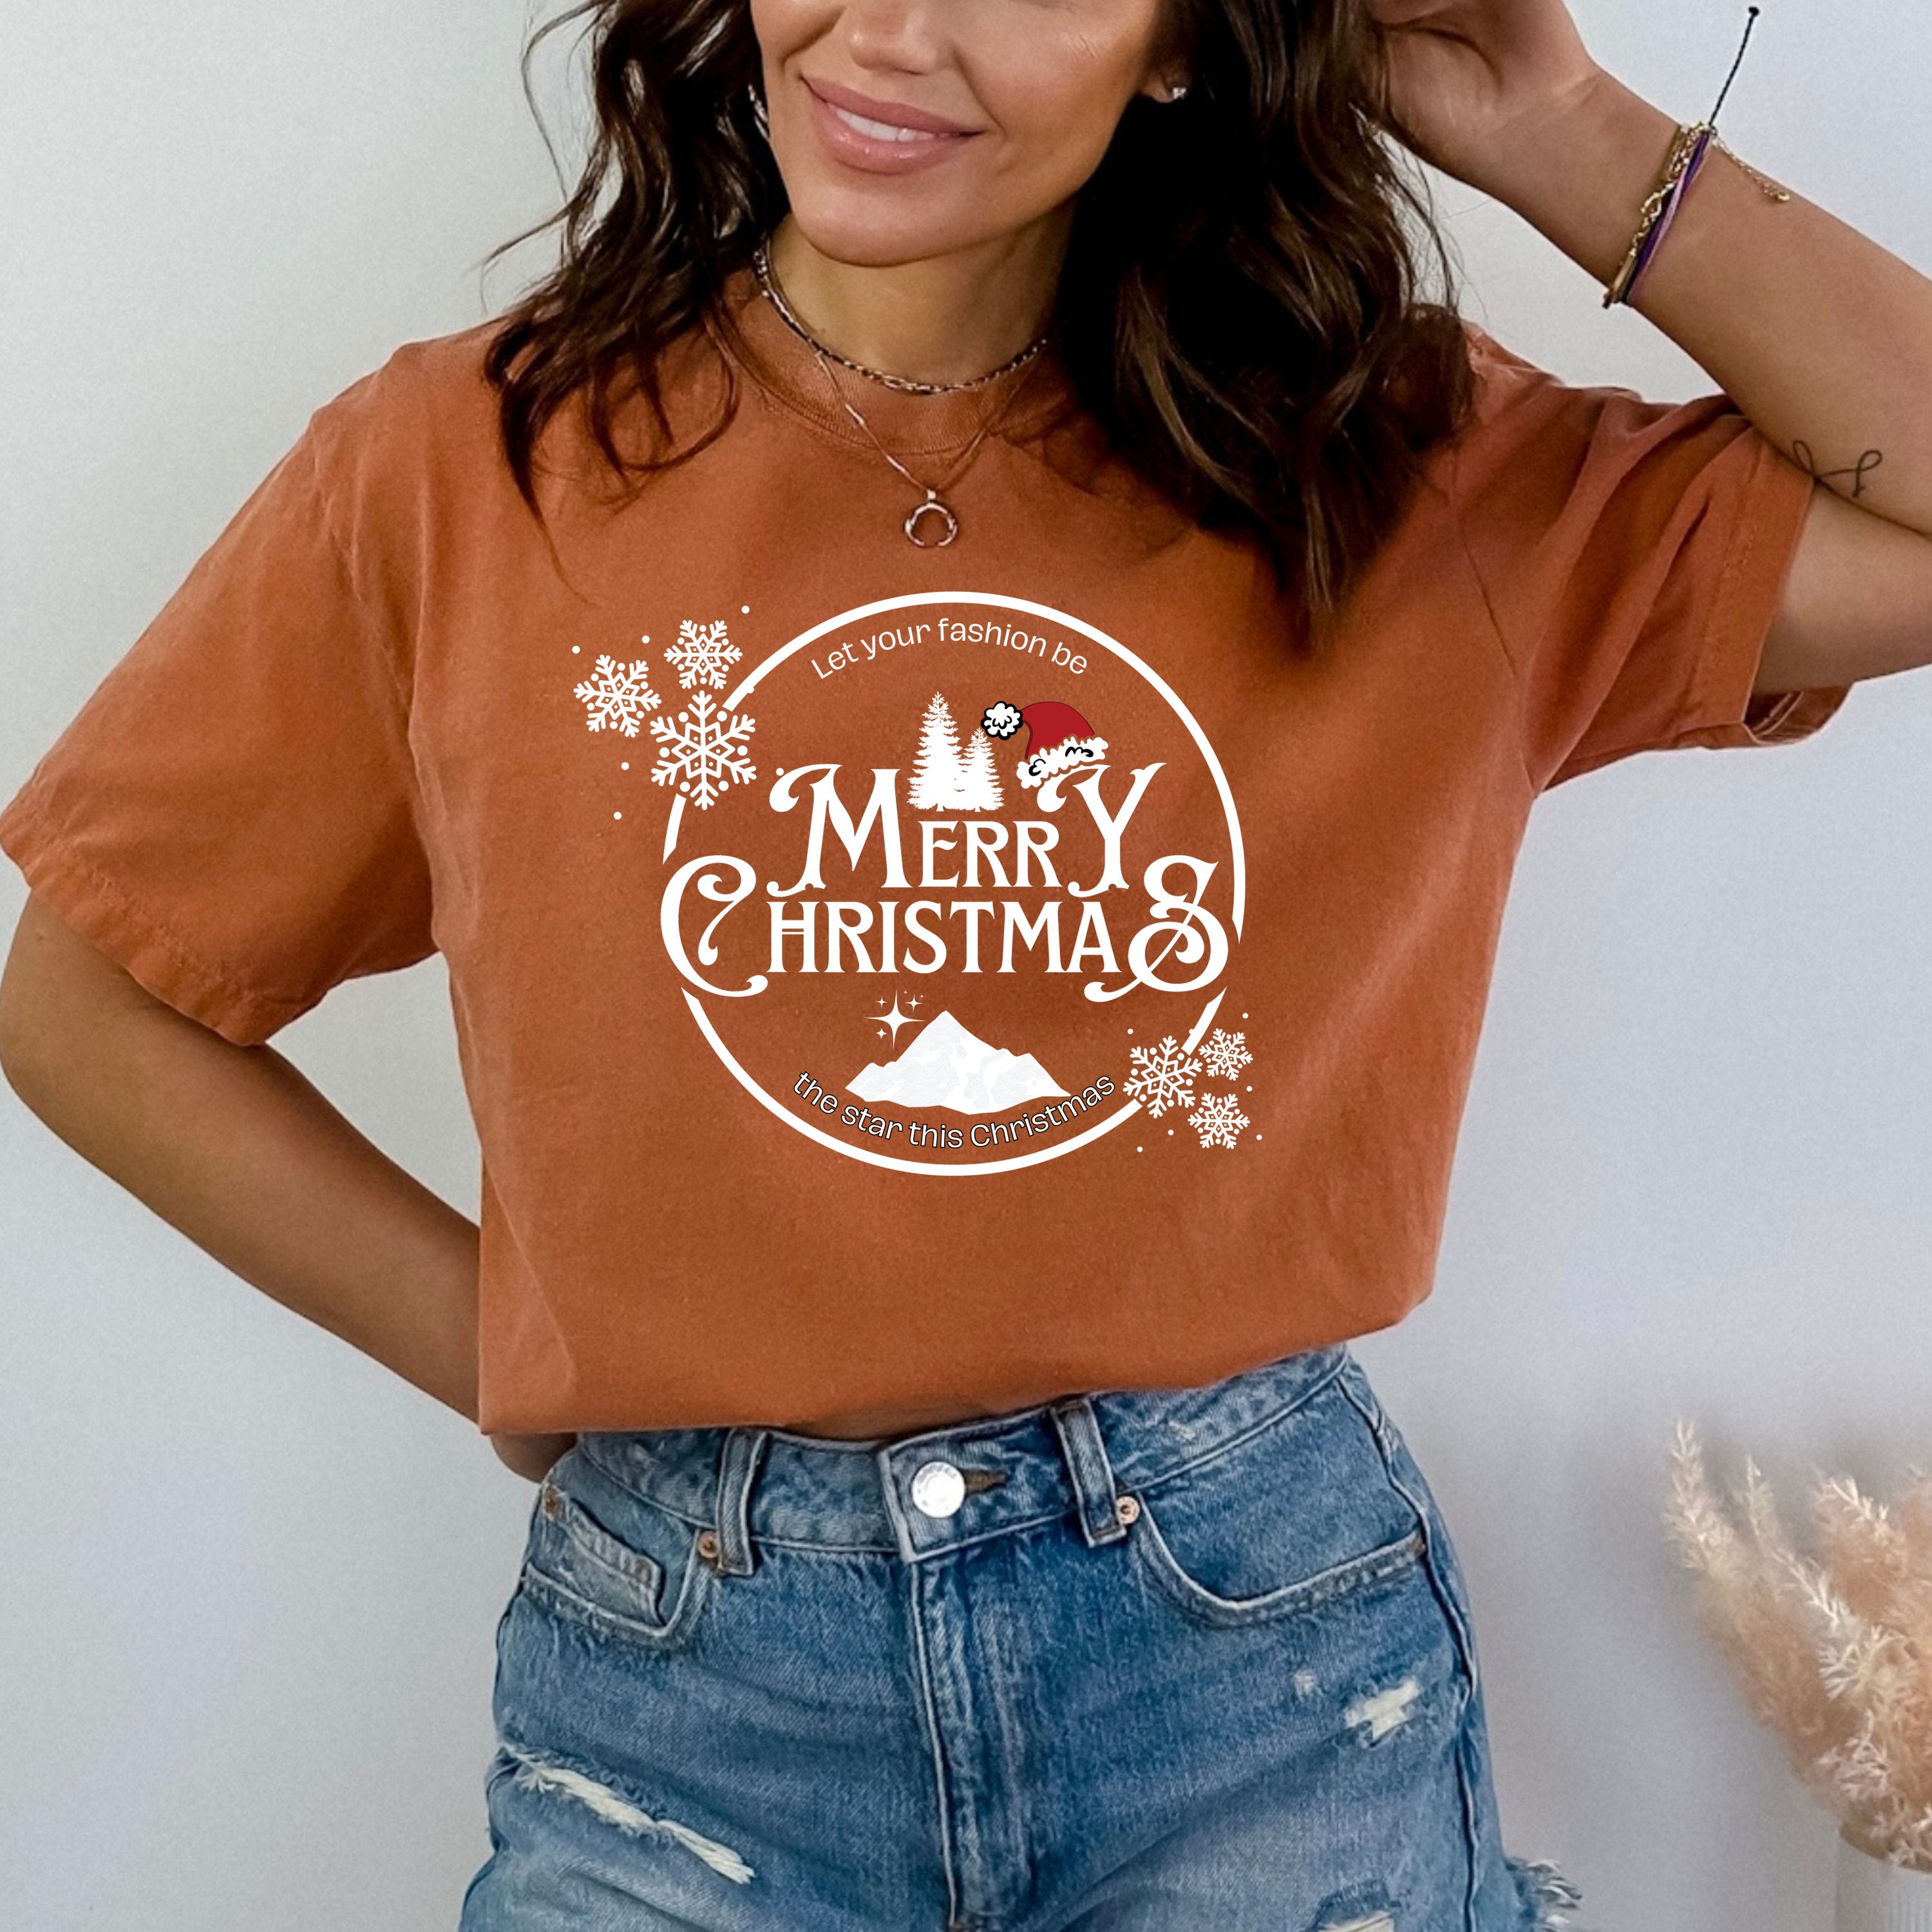 Let Your Fashion Be Merry Christmas - Bella canvas